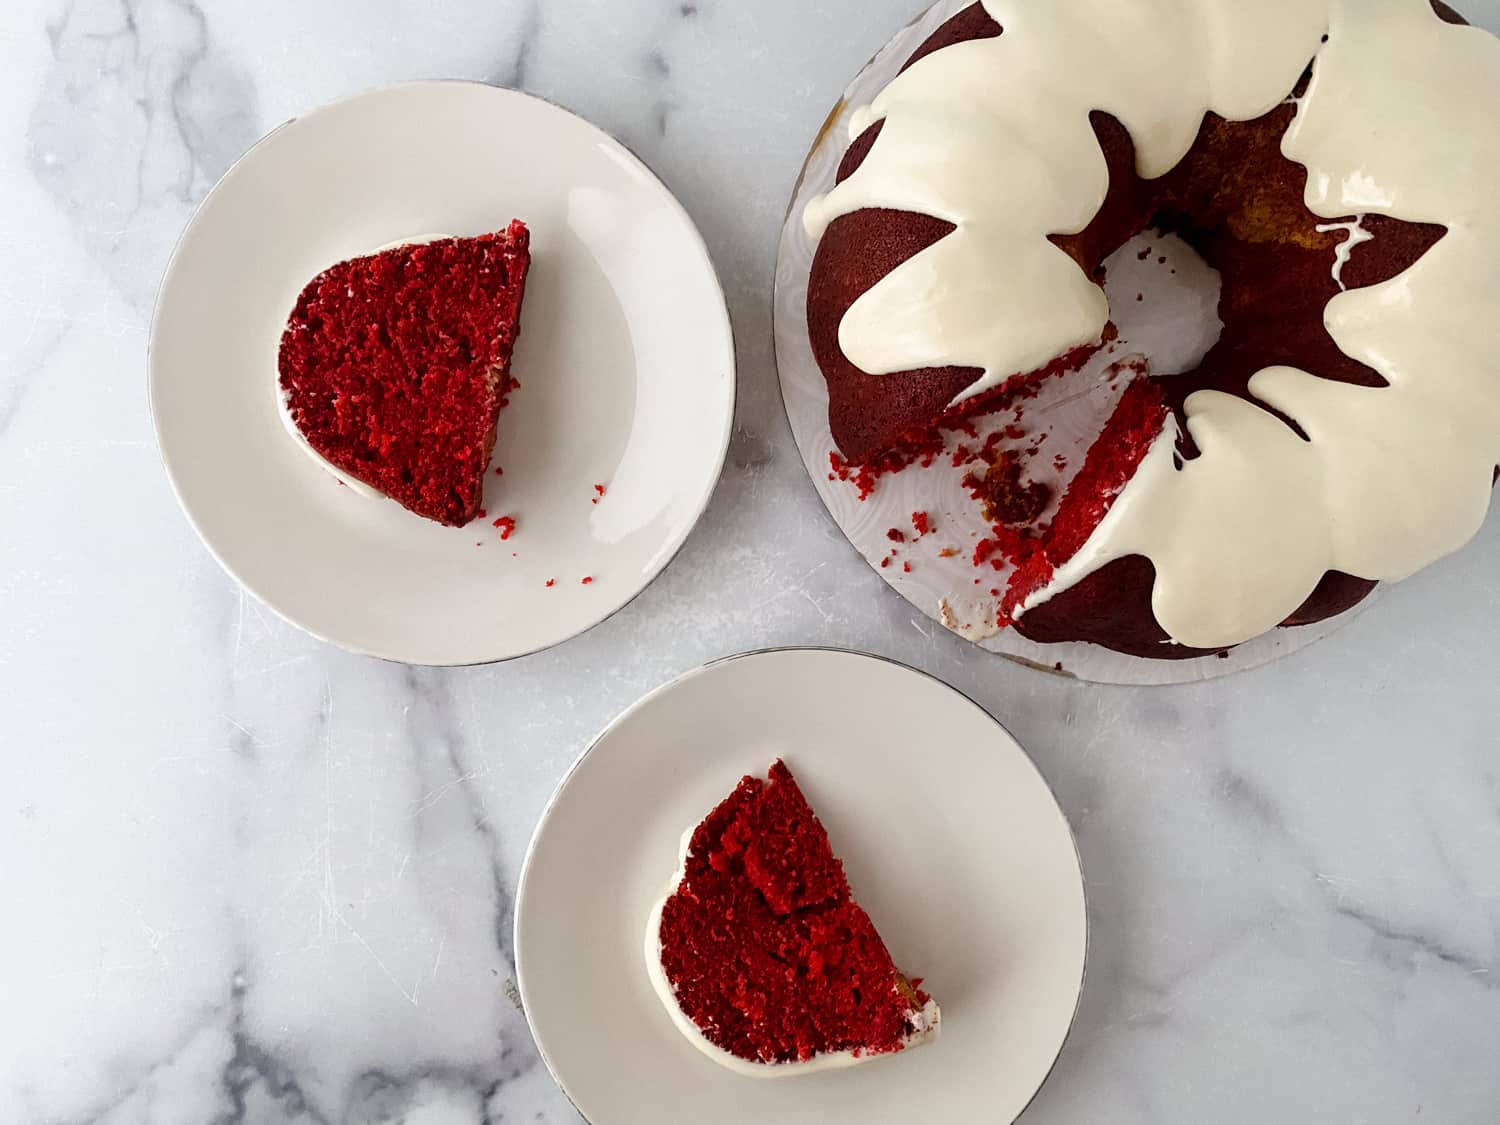 Delicious Red Velvet Pound Cake Recipe From Scratch